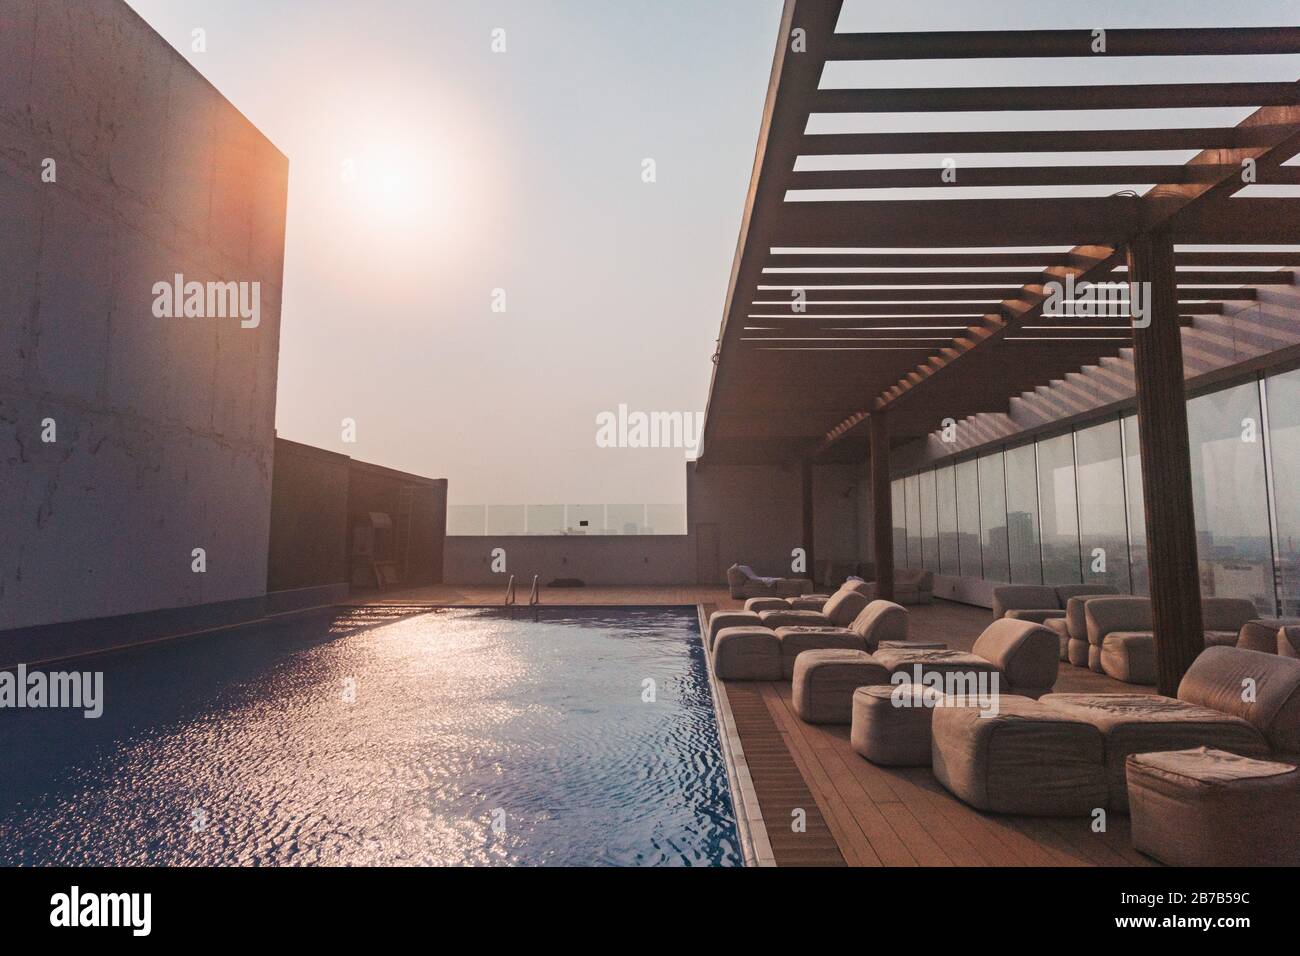 A hotel rooftop swimming pool and deckchairs on a hot afternoon in Doha, Qatar Stock Photo